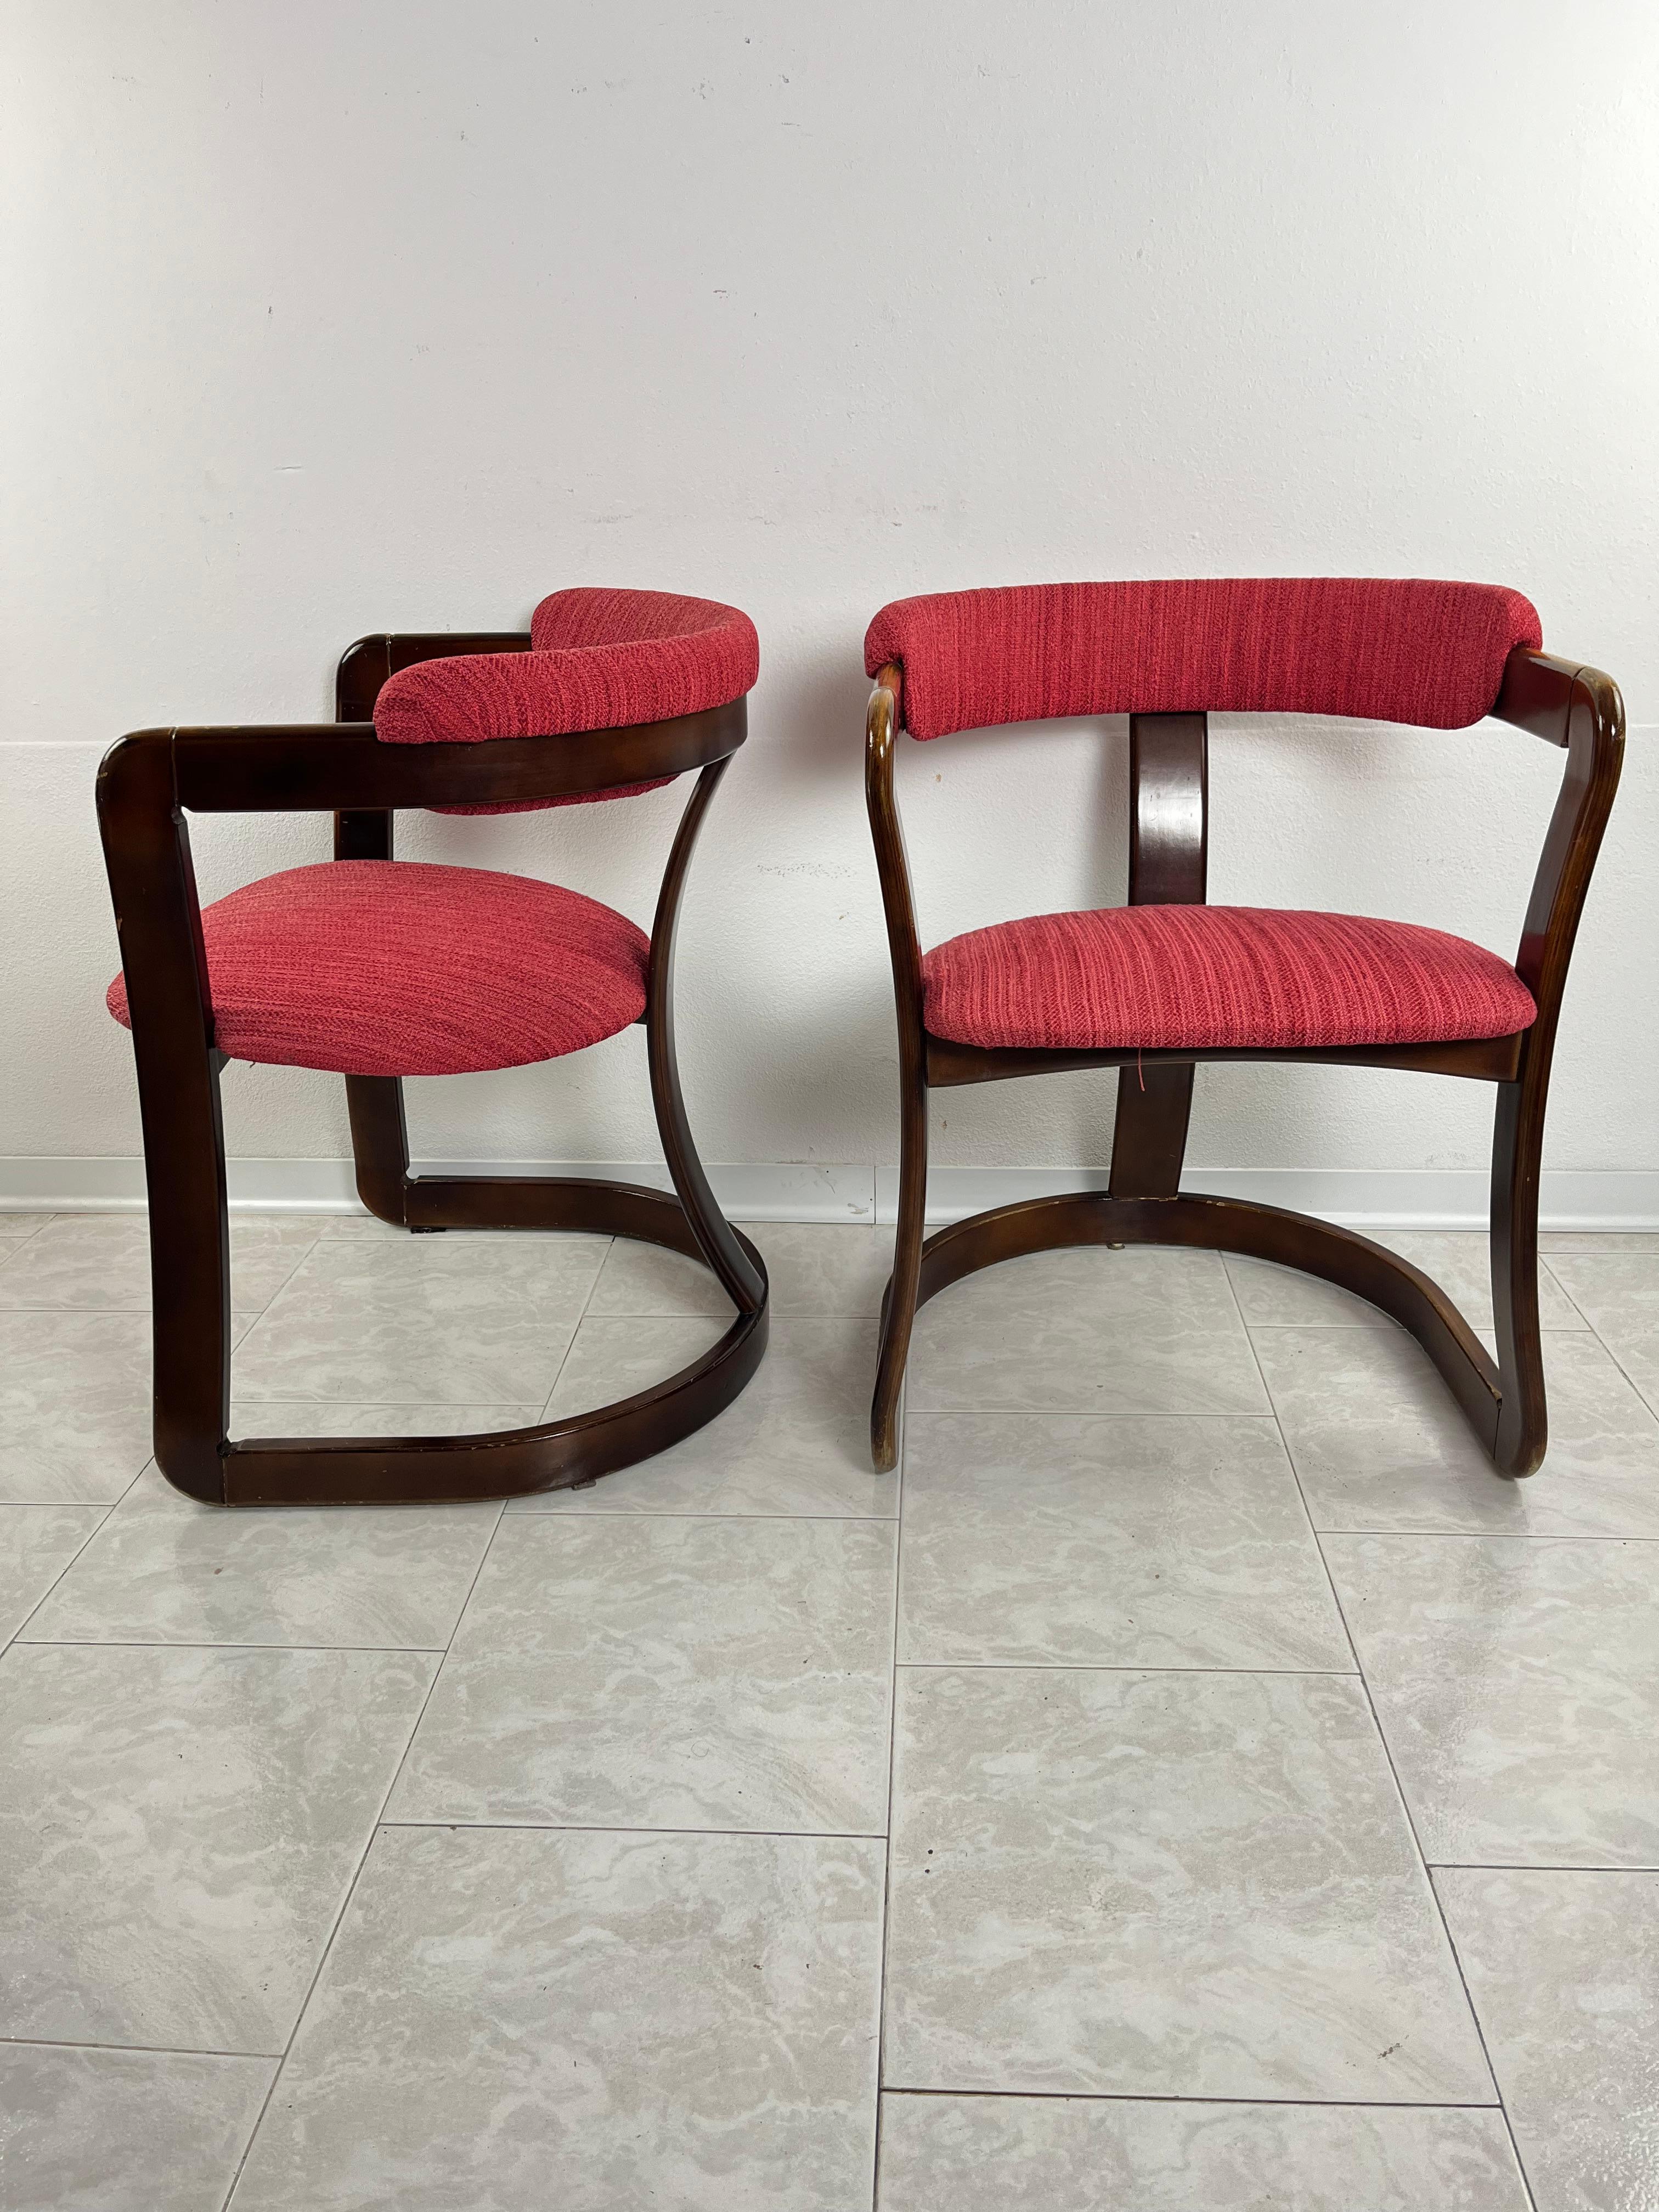 Mid-20th Century Set of 2 Mid-Century Curved Wooden Chairs Attributed to A. & P. Castiglioni For Sale